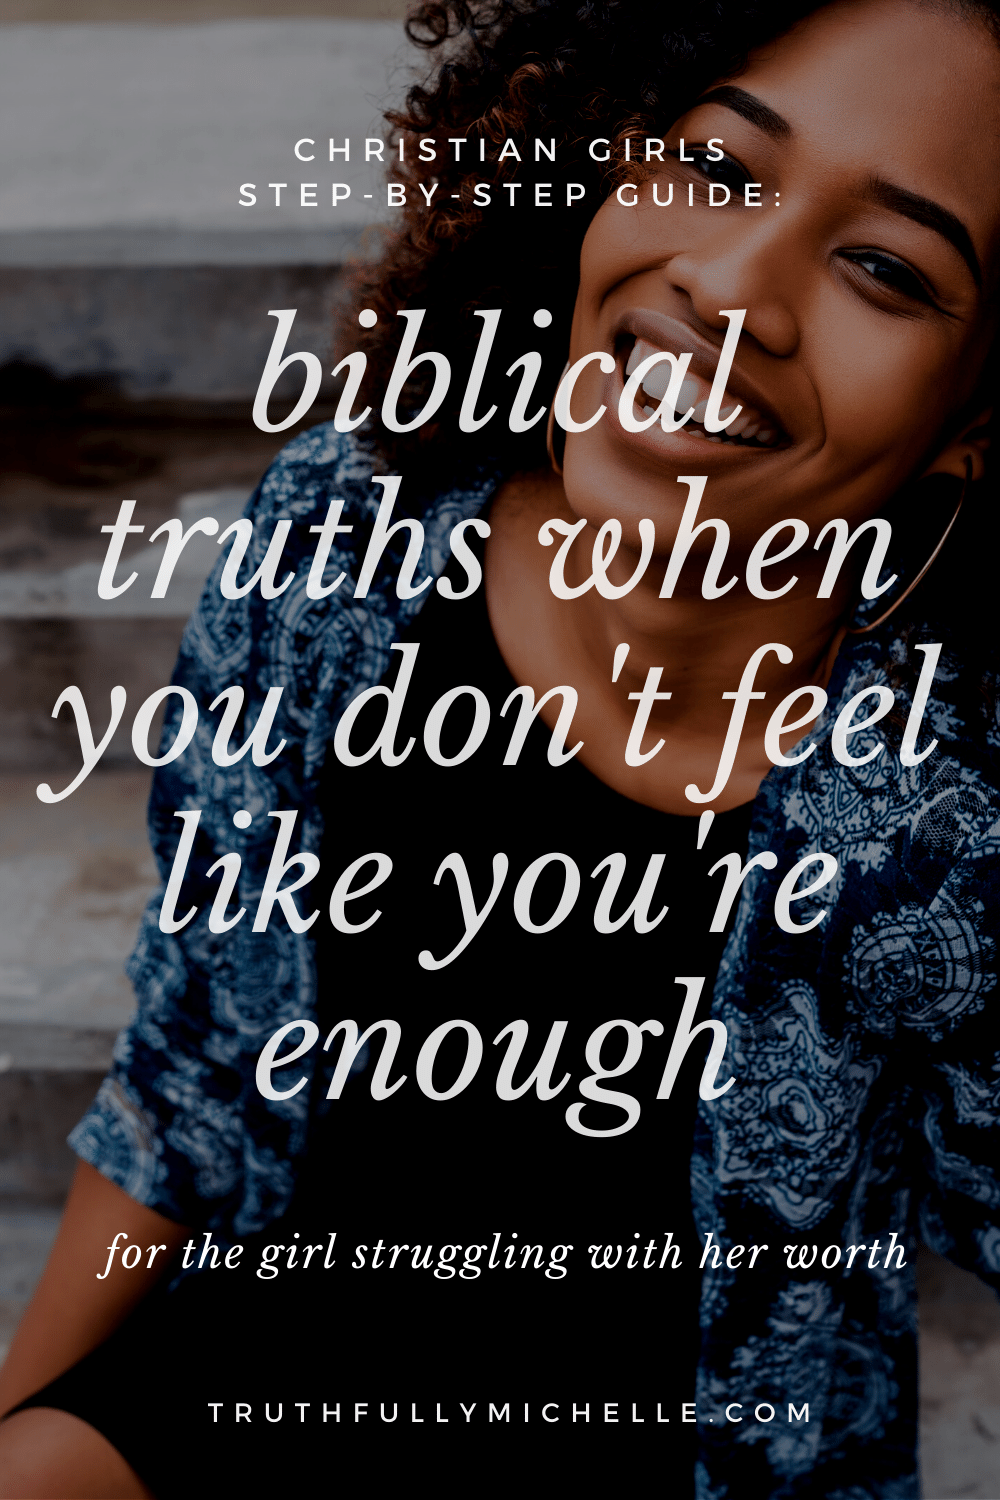 Biblical truths for women, Biblical truths for girls, Speaking Biblical truths, Why I am not enough, I know I am not enough, When I am not enough, When I feel like I am not enough, I am not enough but God is, Christ is enough for me, Christ is enough Jesus, Jesus is enough for me , God is enough for me, Only God is enough, My God is enough, Until God is enough, When God is enough, God is enough for us, Find your worth in Christ, Knowing your worth in Christ, Self worth in Christ, Finding my worth in Christ, Finding worth in Jesus, Find your worth in Jesus, My God is more than enough, Is Jesus enough for you